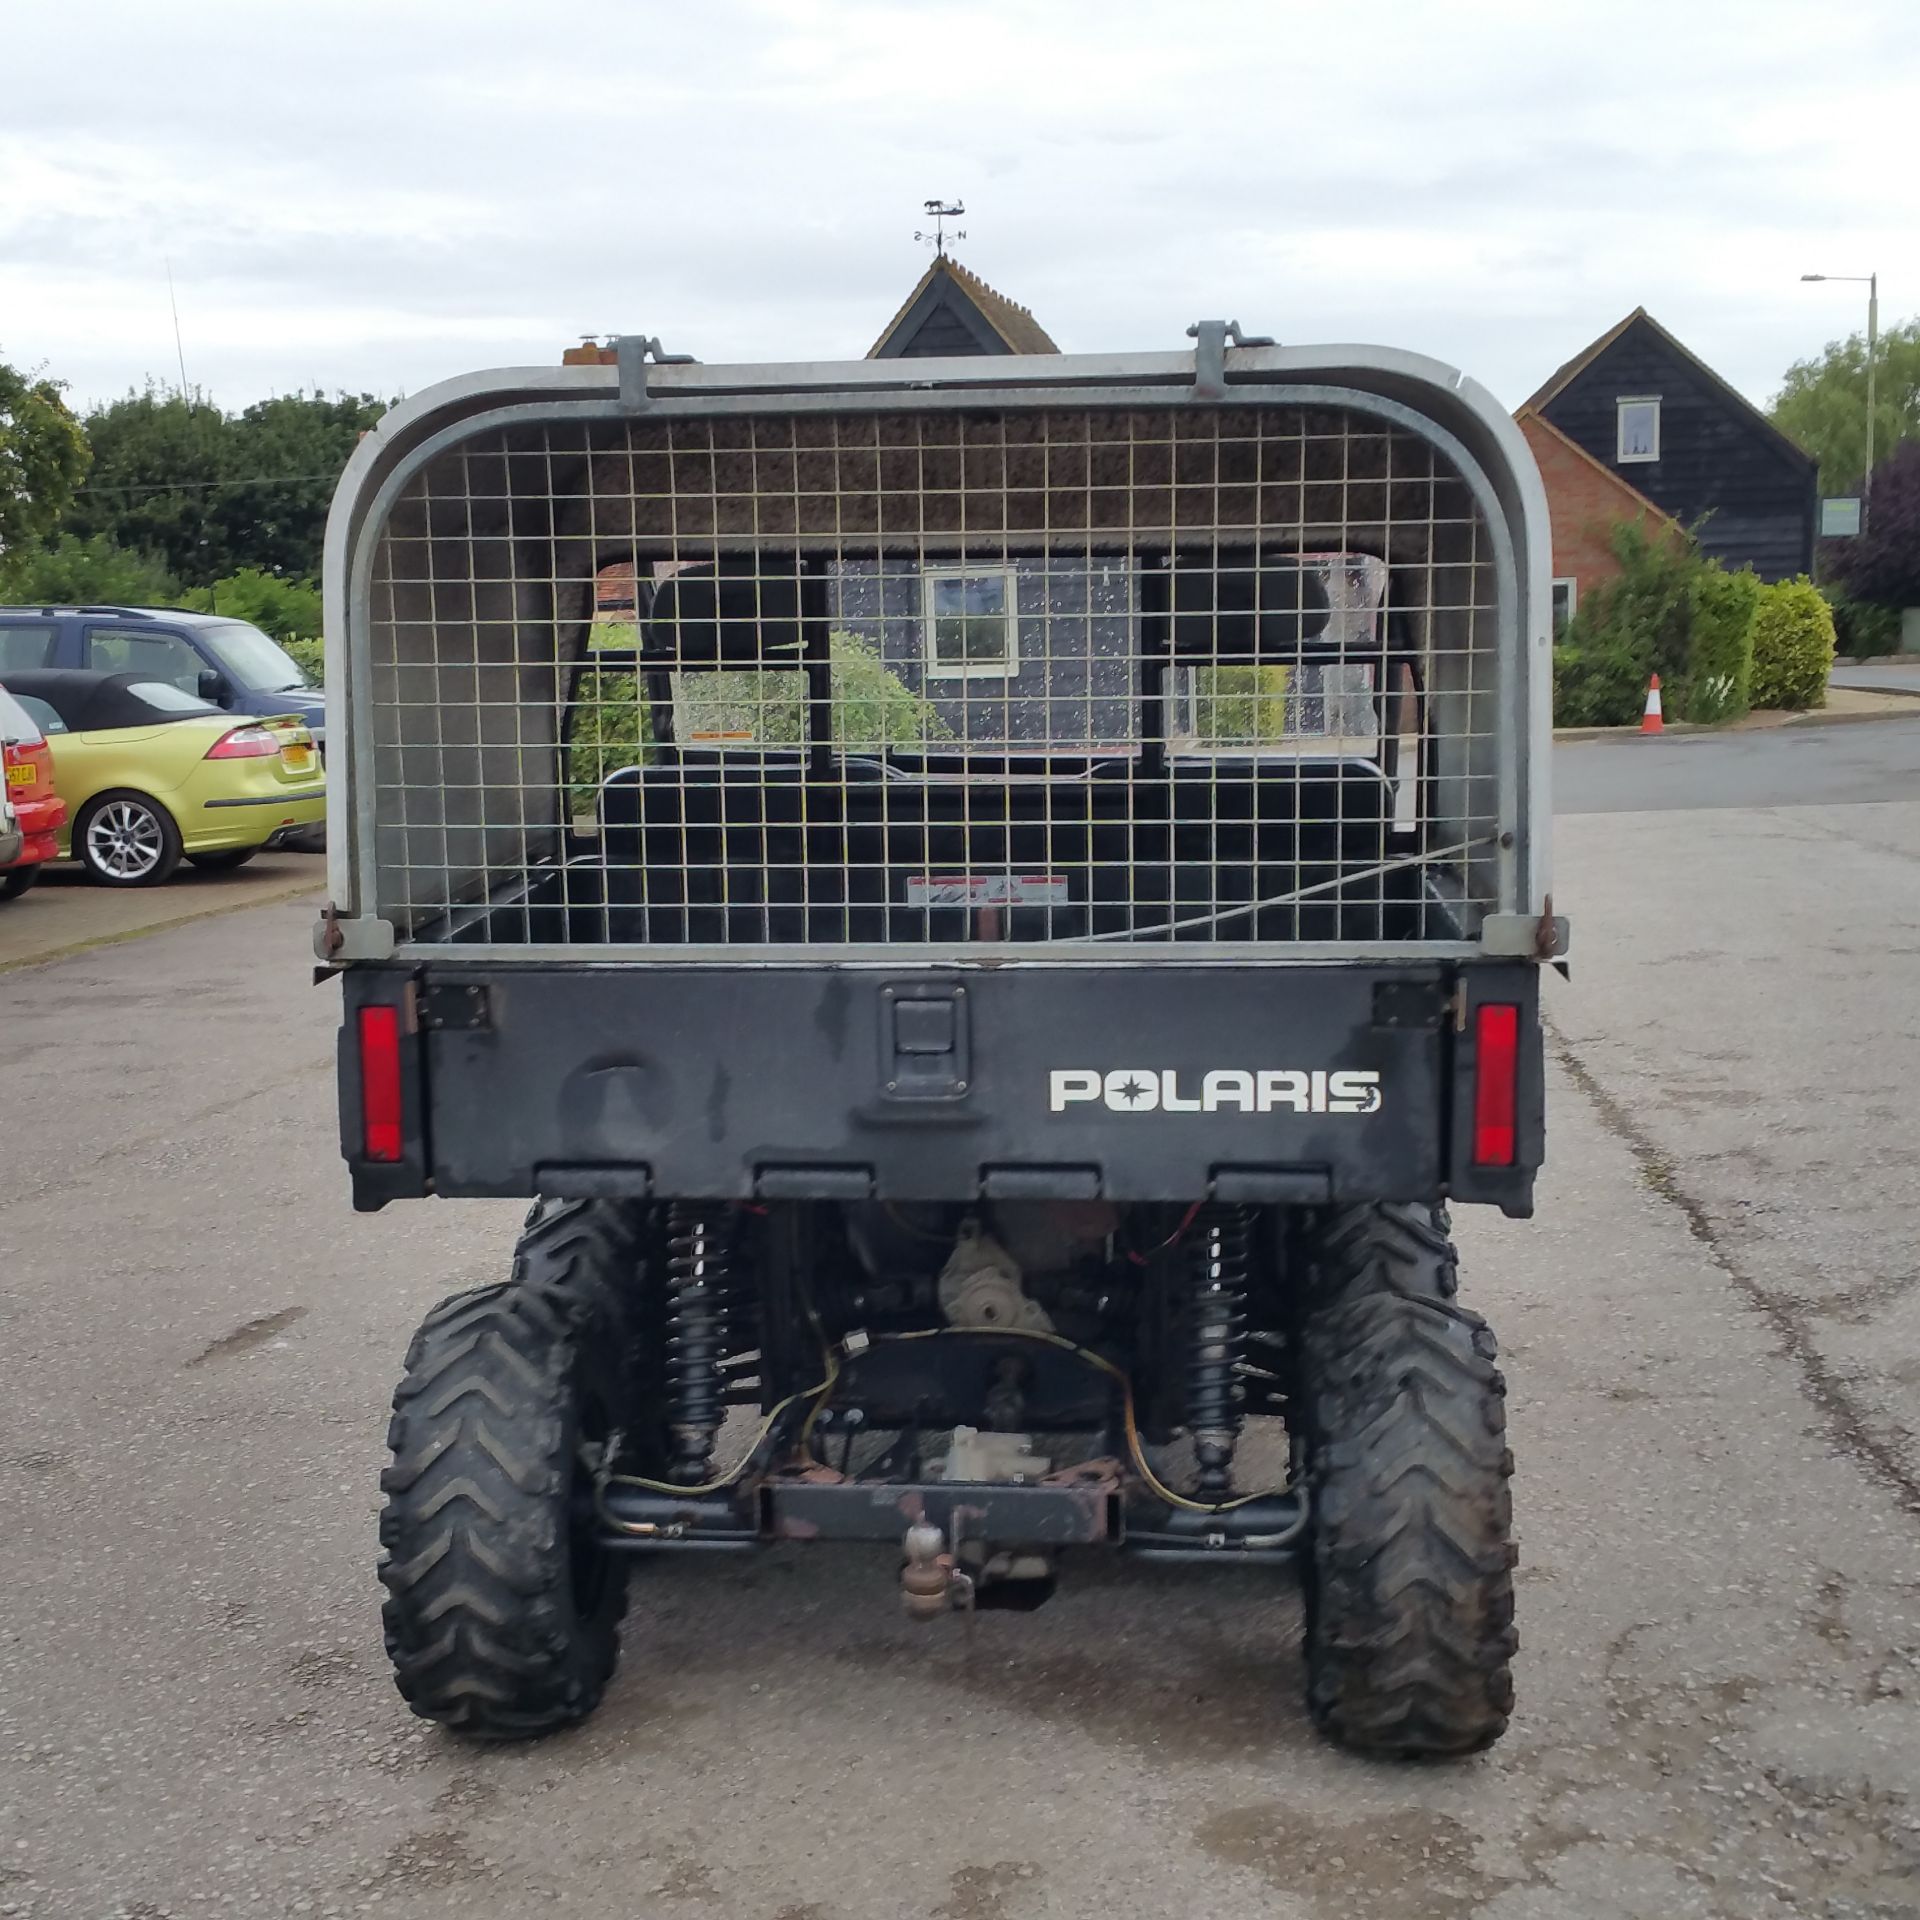 Polaris Ranger 6x6 500cc single cylinder petrol Hours 932 Year of manufacture 2004 4 or 6 wheel - Image 5 of 7